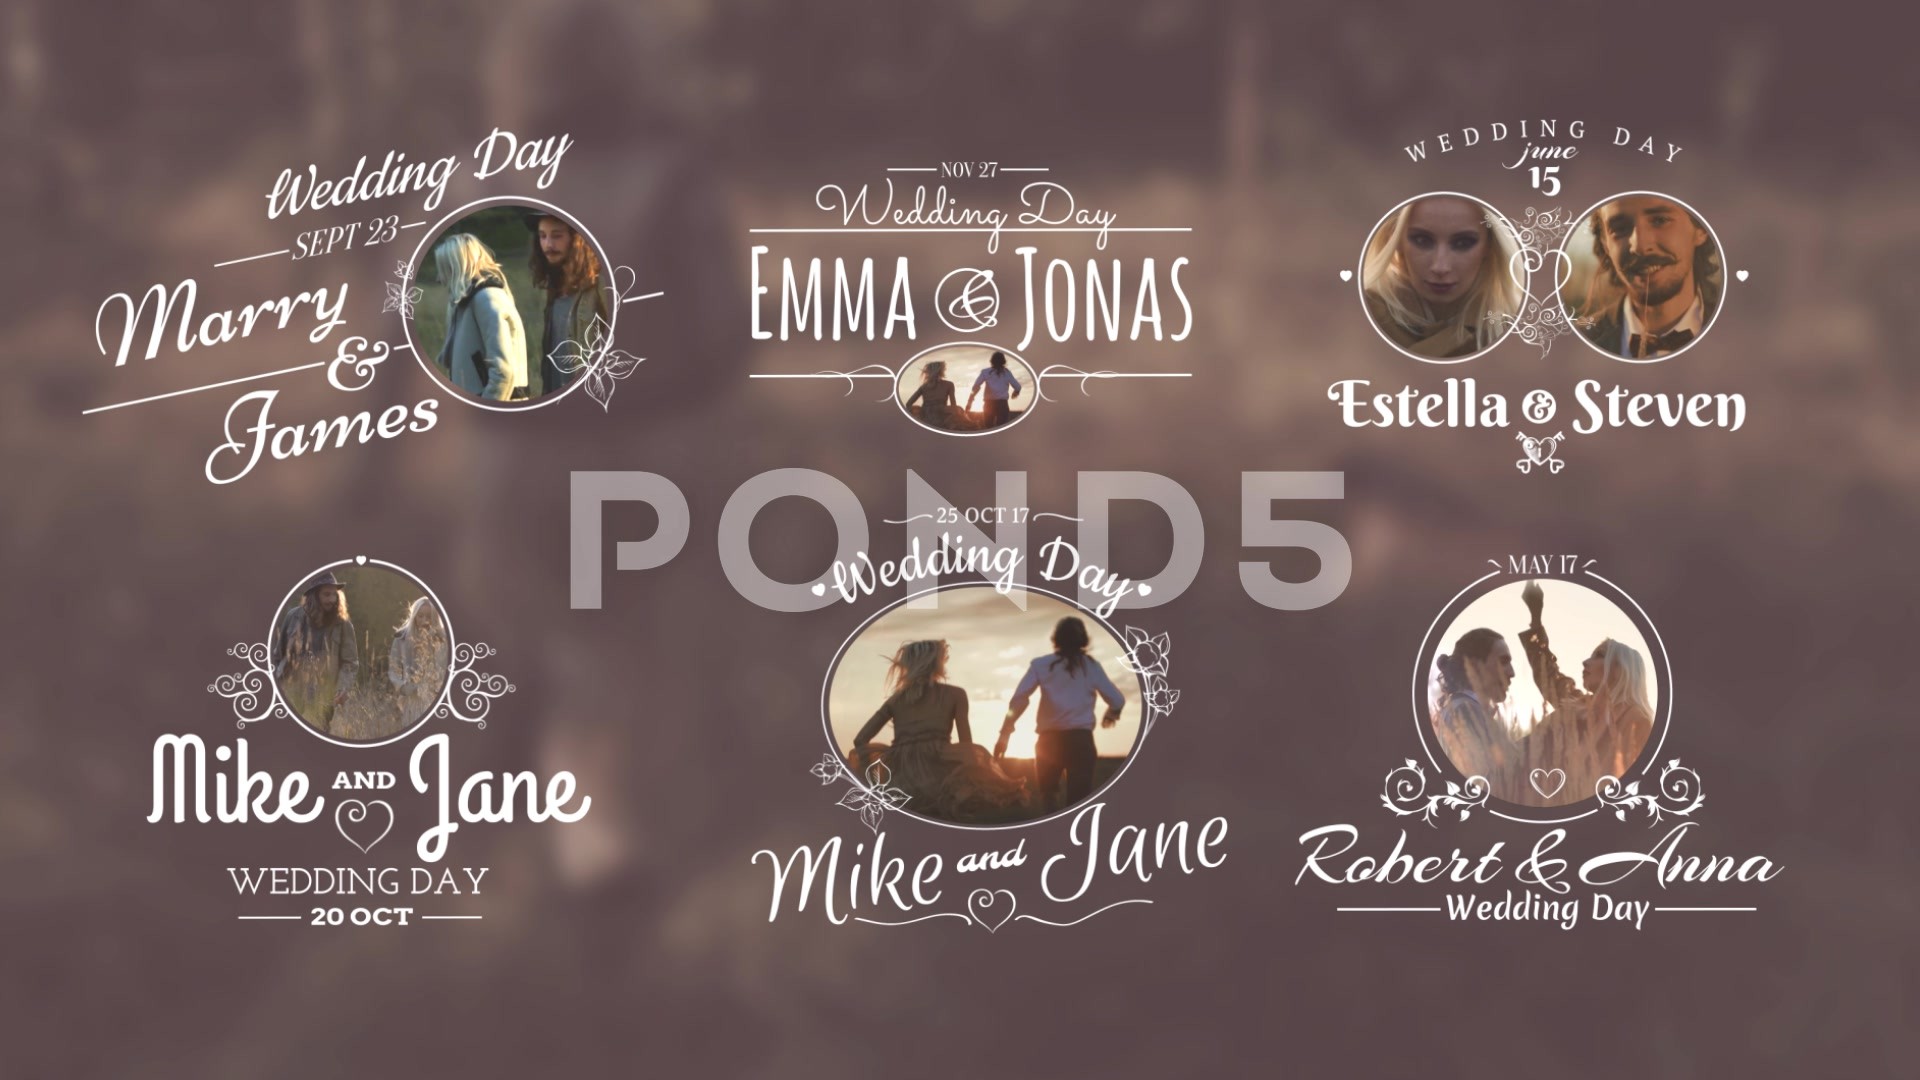 Wedding Titles After Effects Templates S Pond5 Title